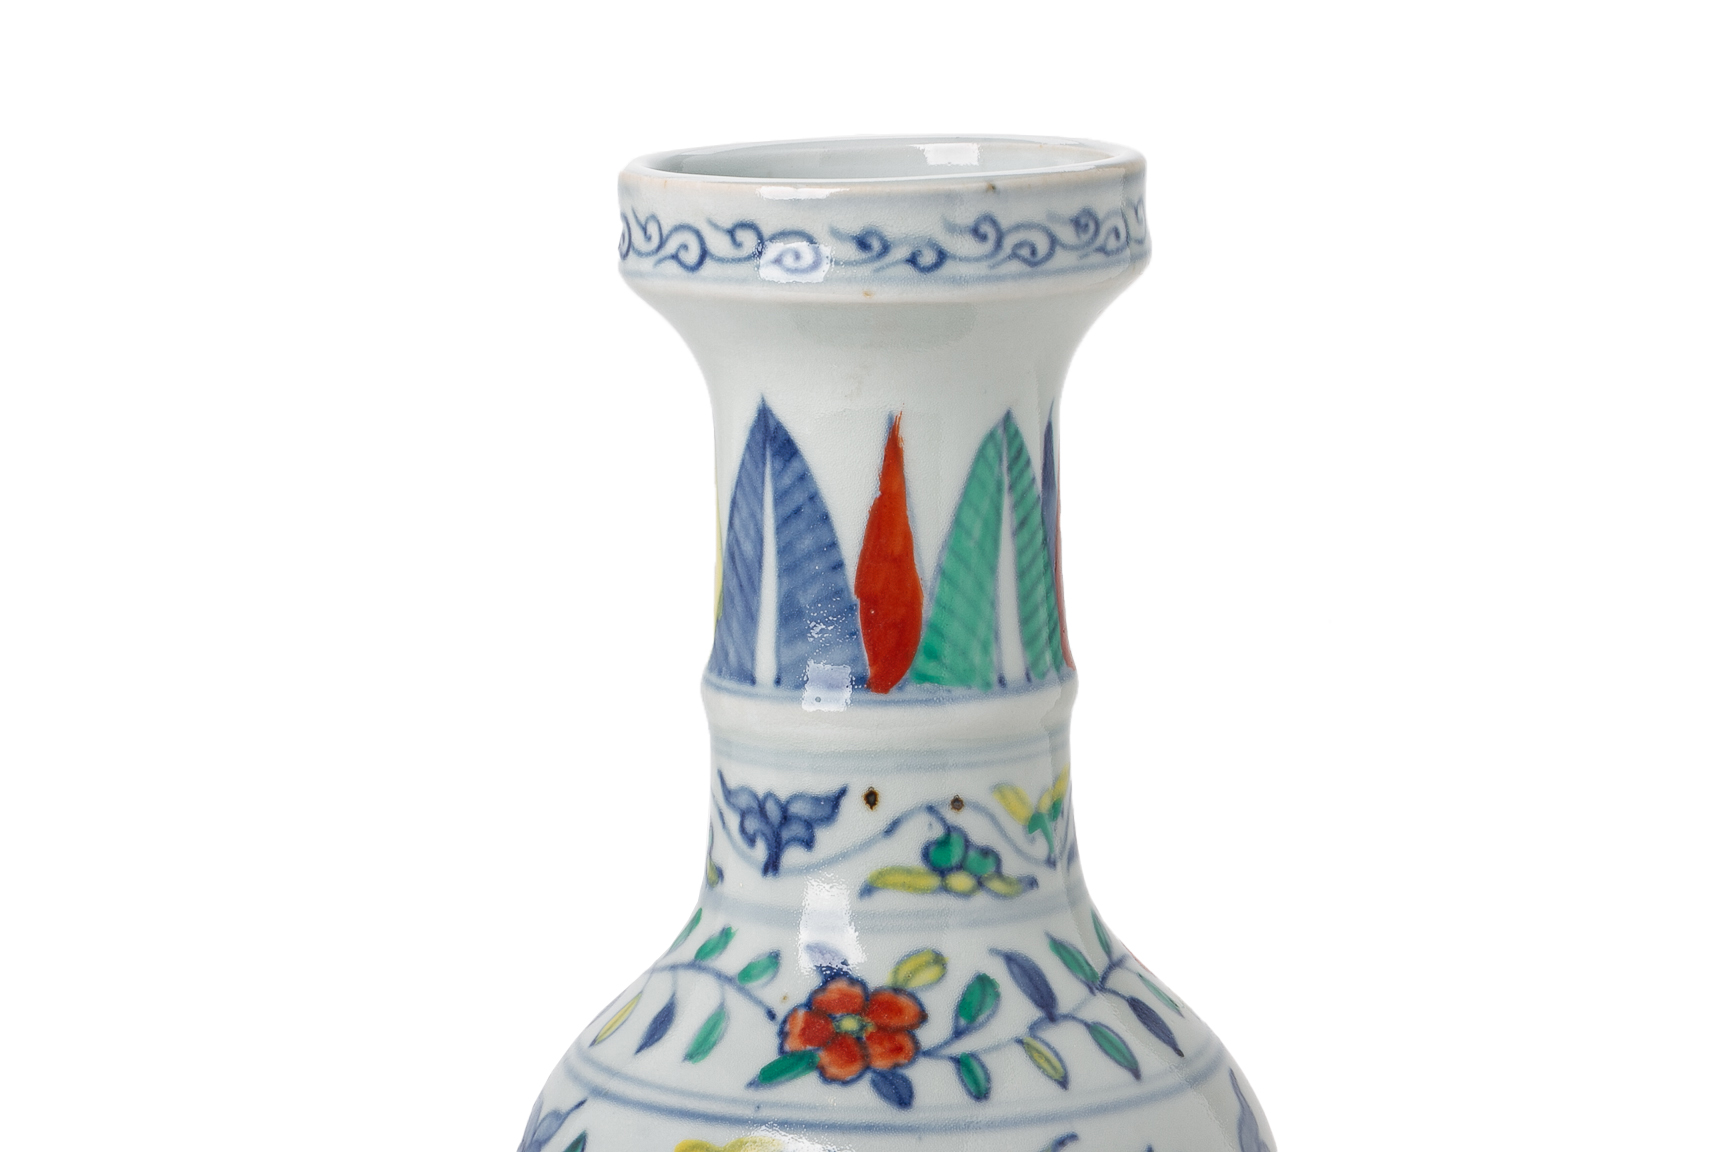 A CHINESE MING STYLE DOUCAI PORCELAIN VASE - Image 2 of 3